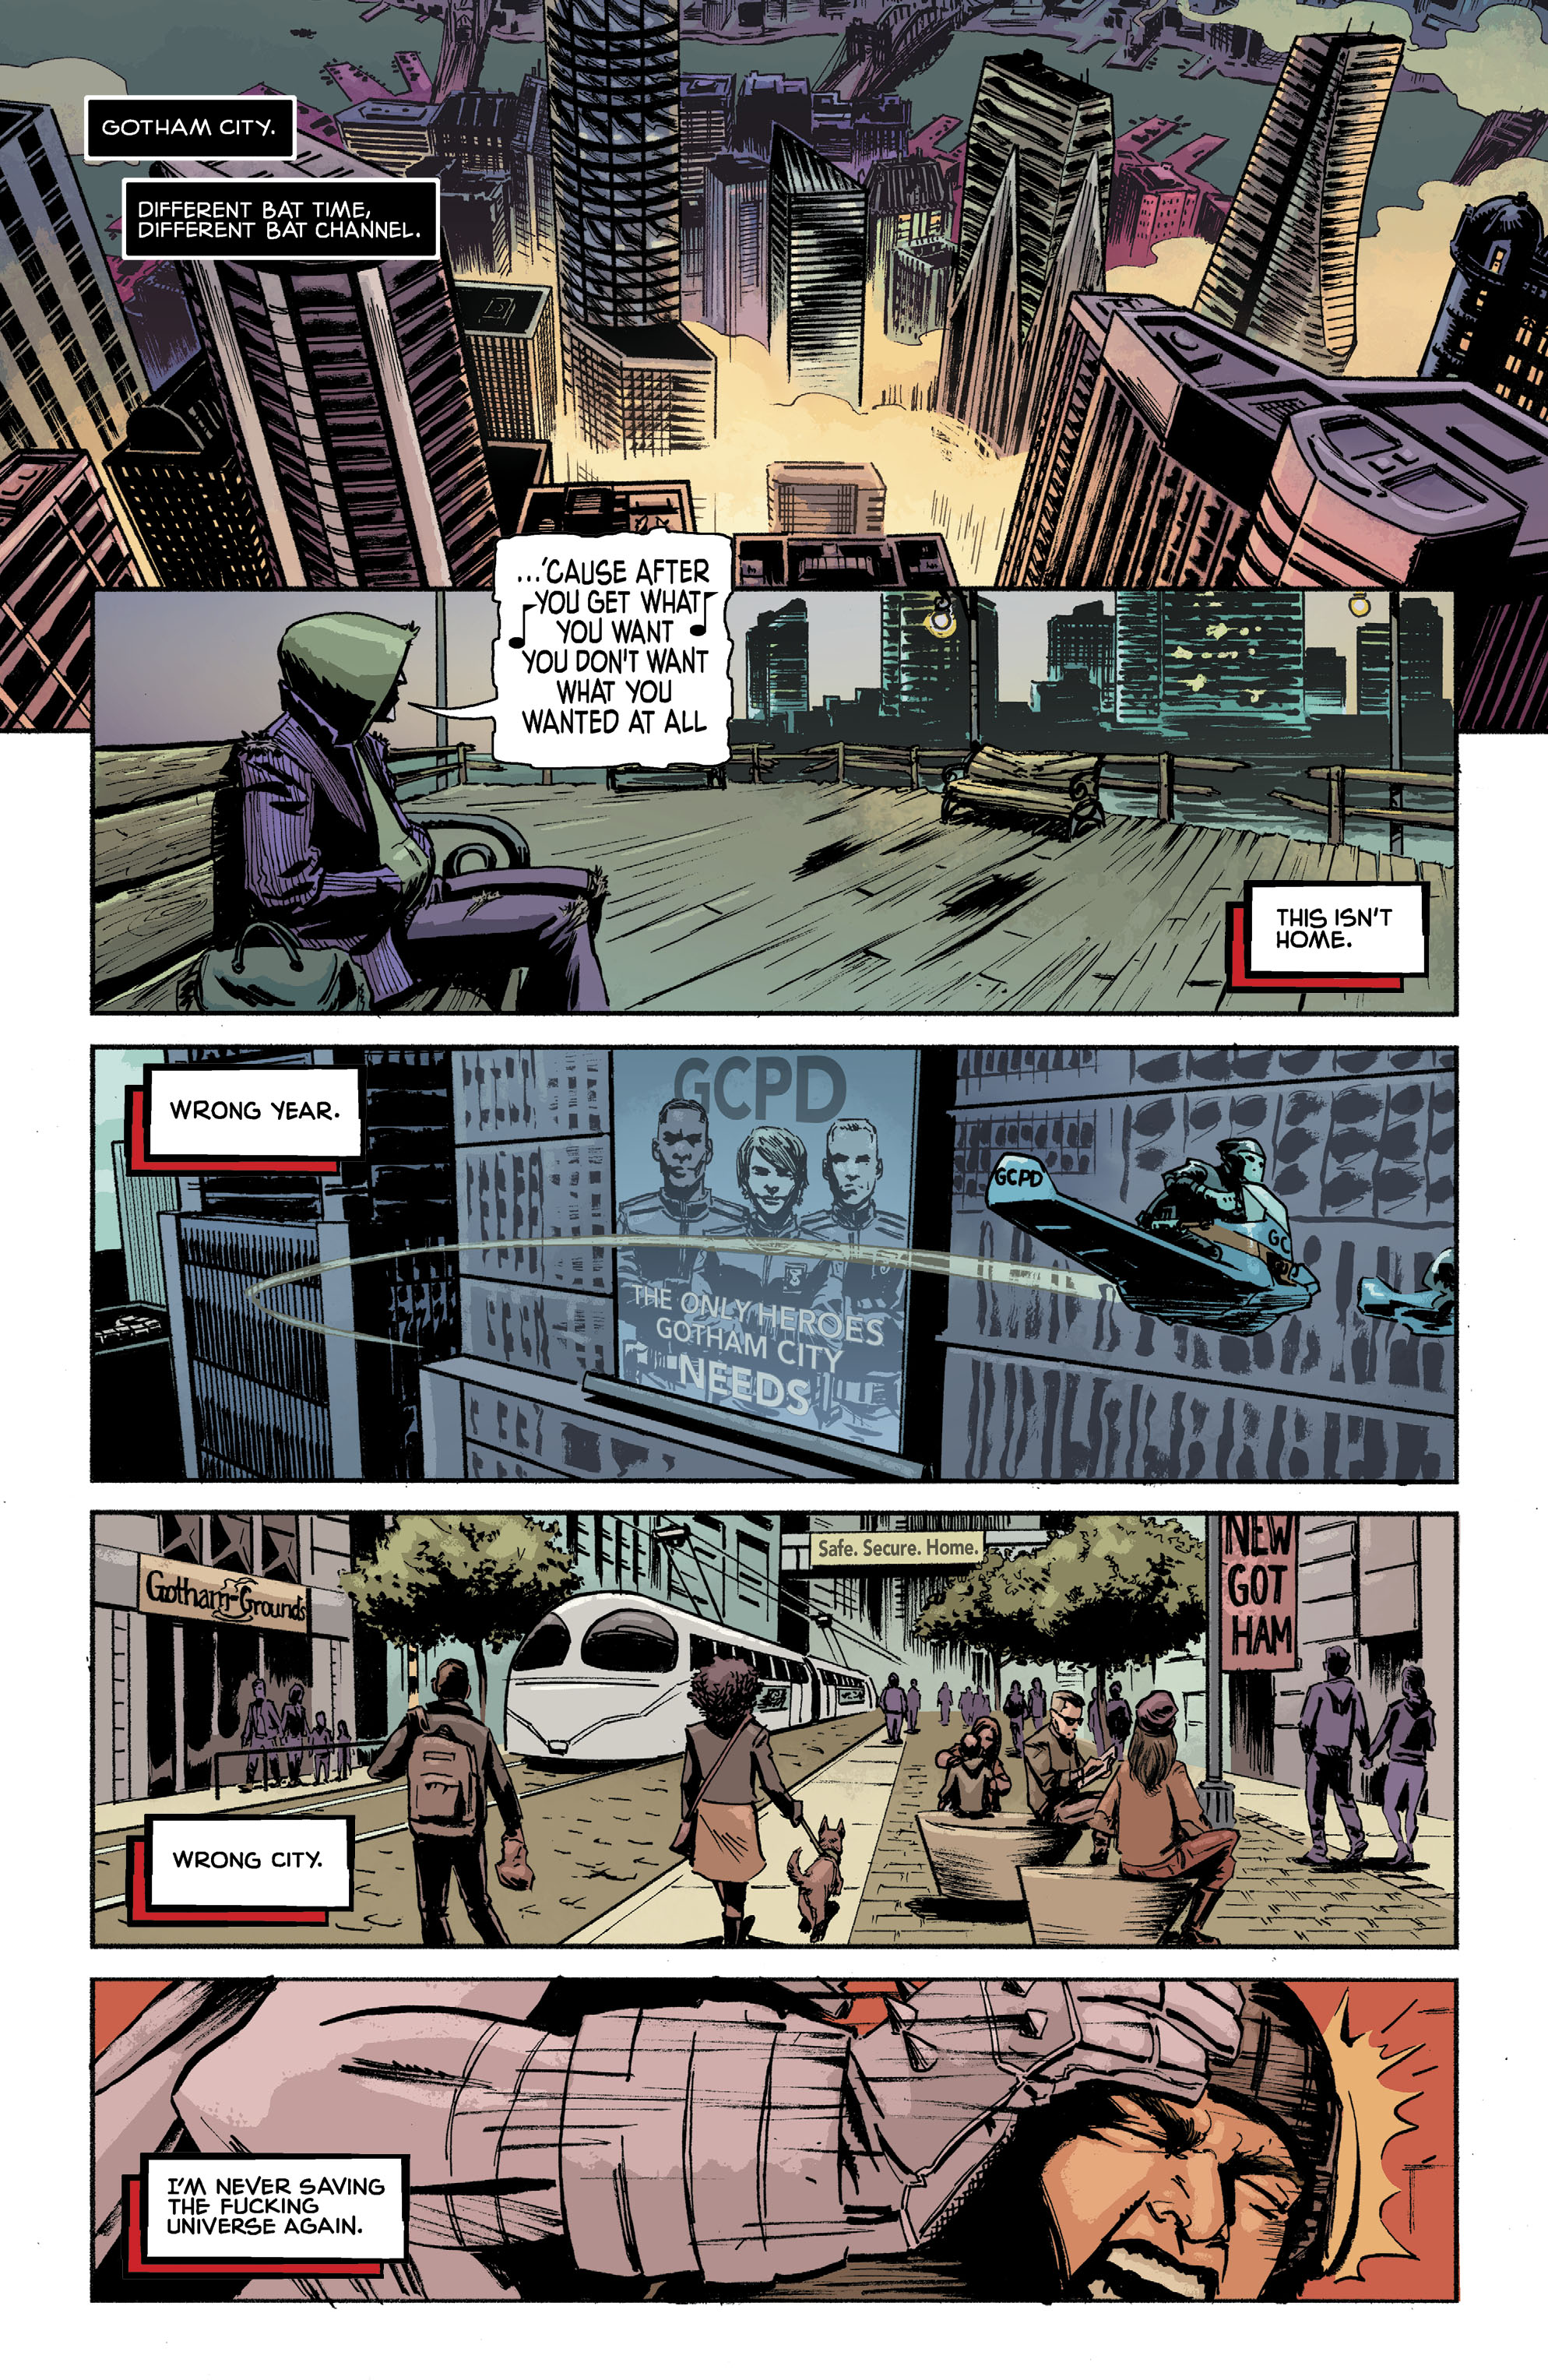 Mother Panic: Gotham A.D. (2018-): Chapter 1 - Page 4